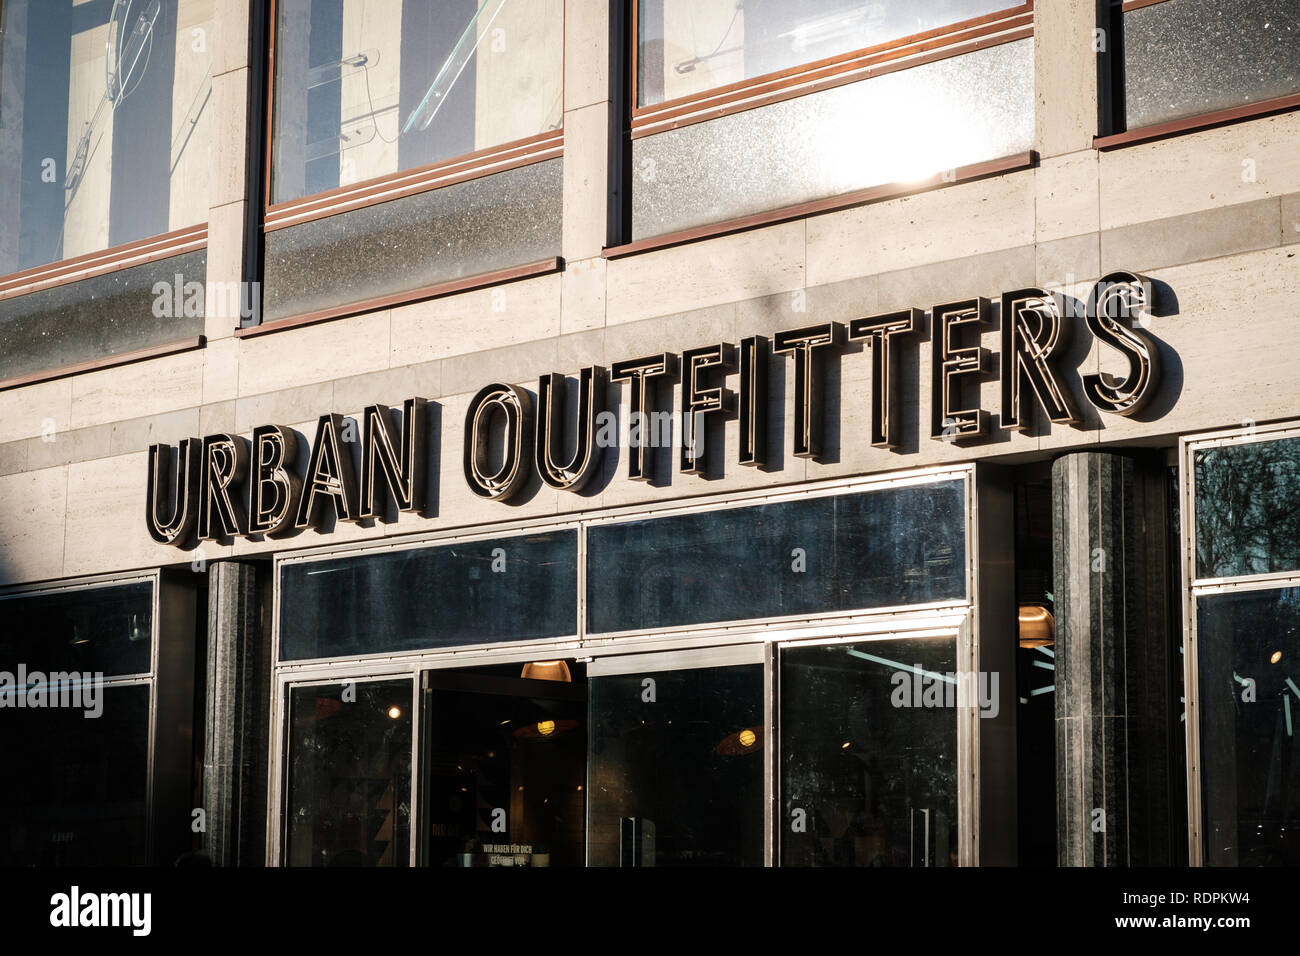 Berlin, Germany - january 2019: Urban Outfitters clothing store shop ...